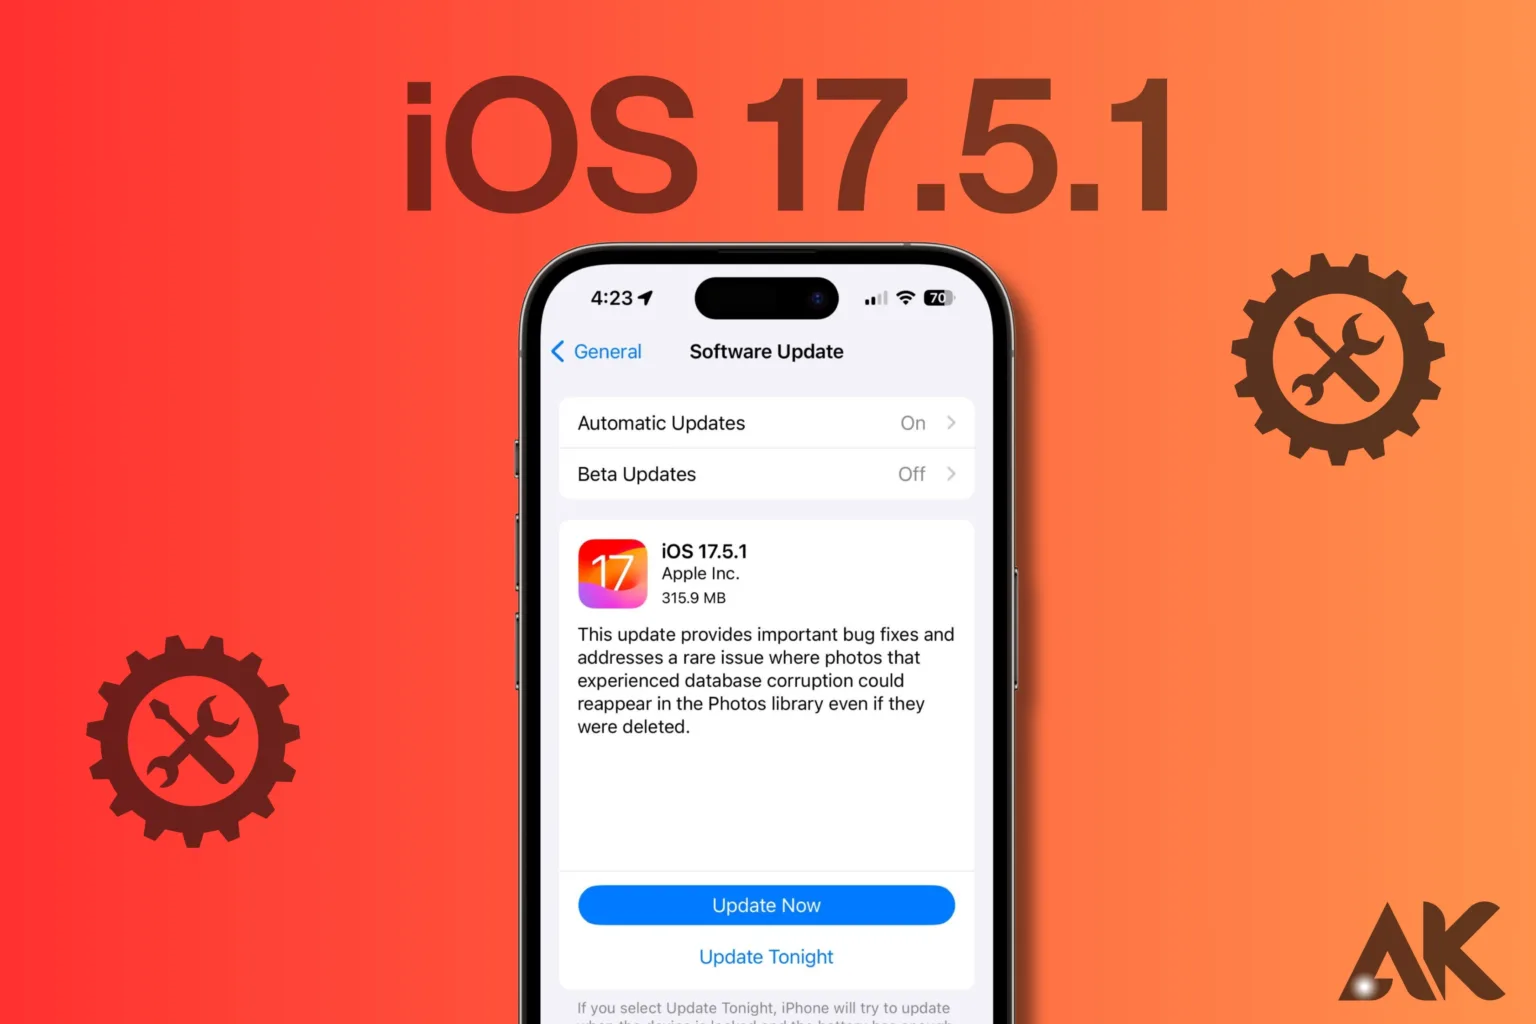 How to install iOS 17.5.1